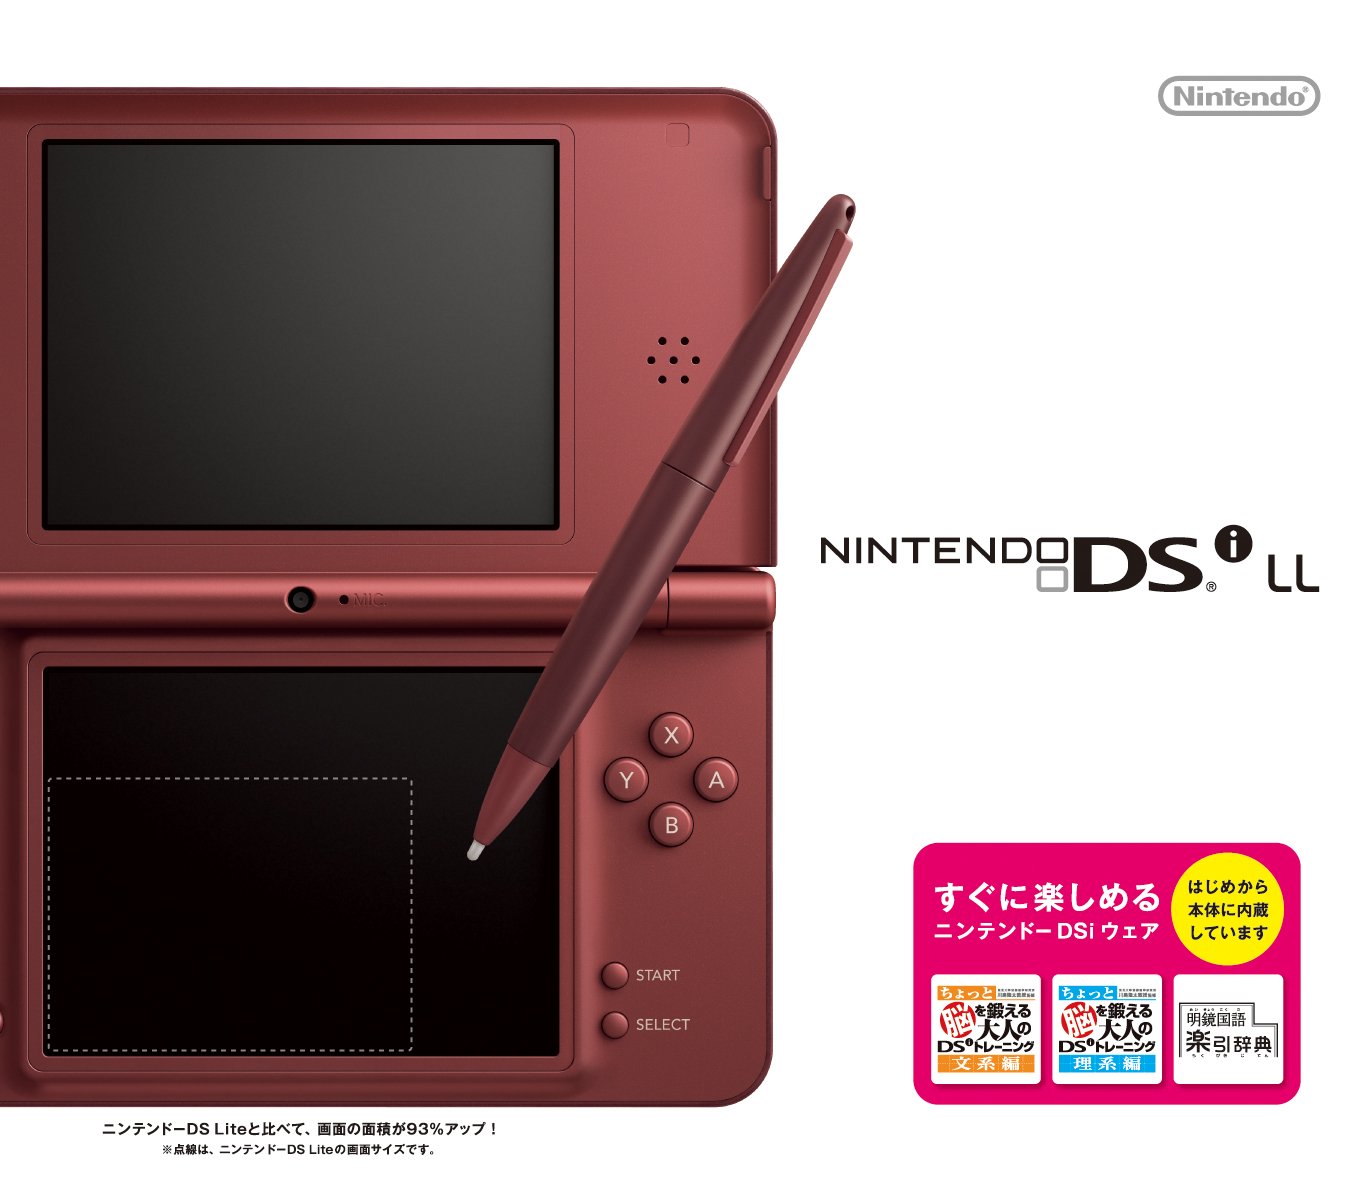 Nintendo DSi LL Portable Video Game Console - Wine Red - Japanese Version (only plays Japanese version DSi games)